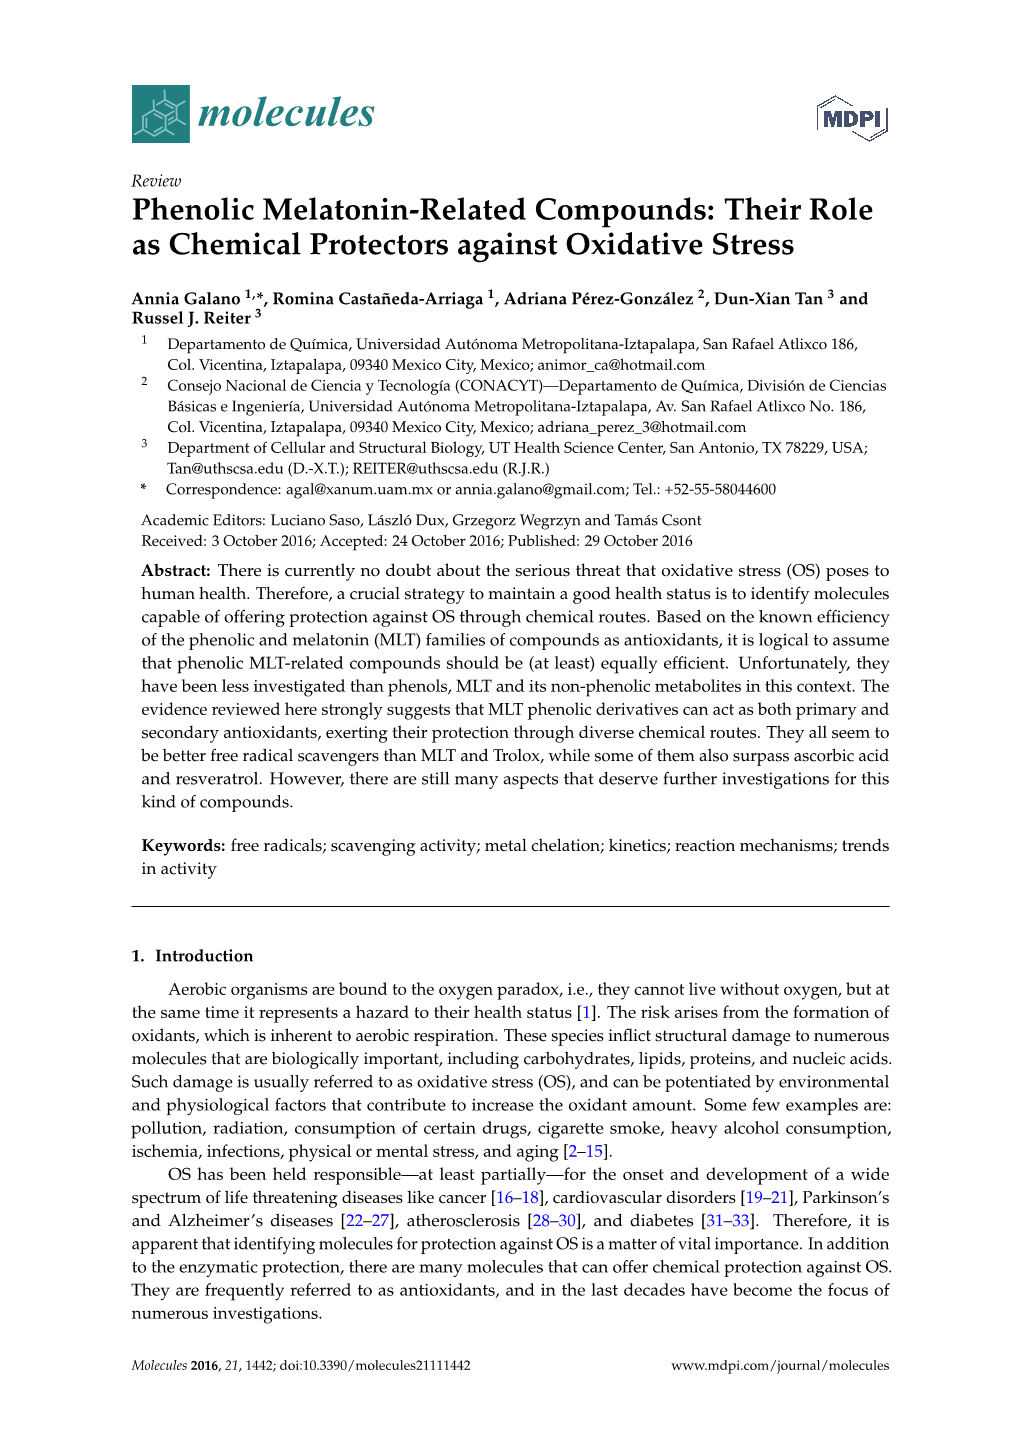 Phenolic Melatonin-Related Compounds: Their Role As Chemical Protectors Against Oxidative Stress